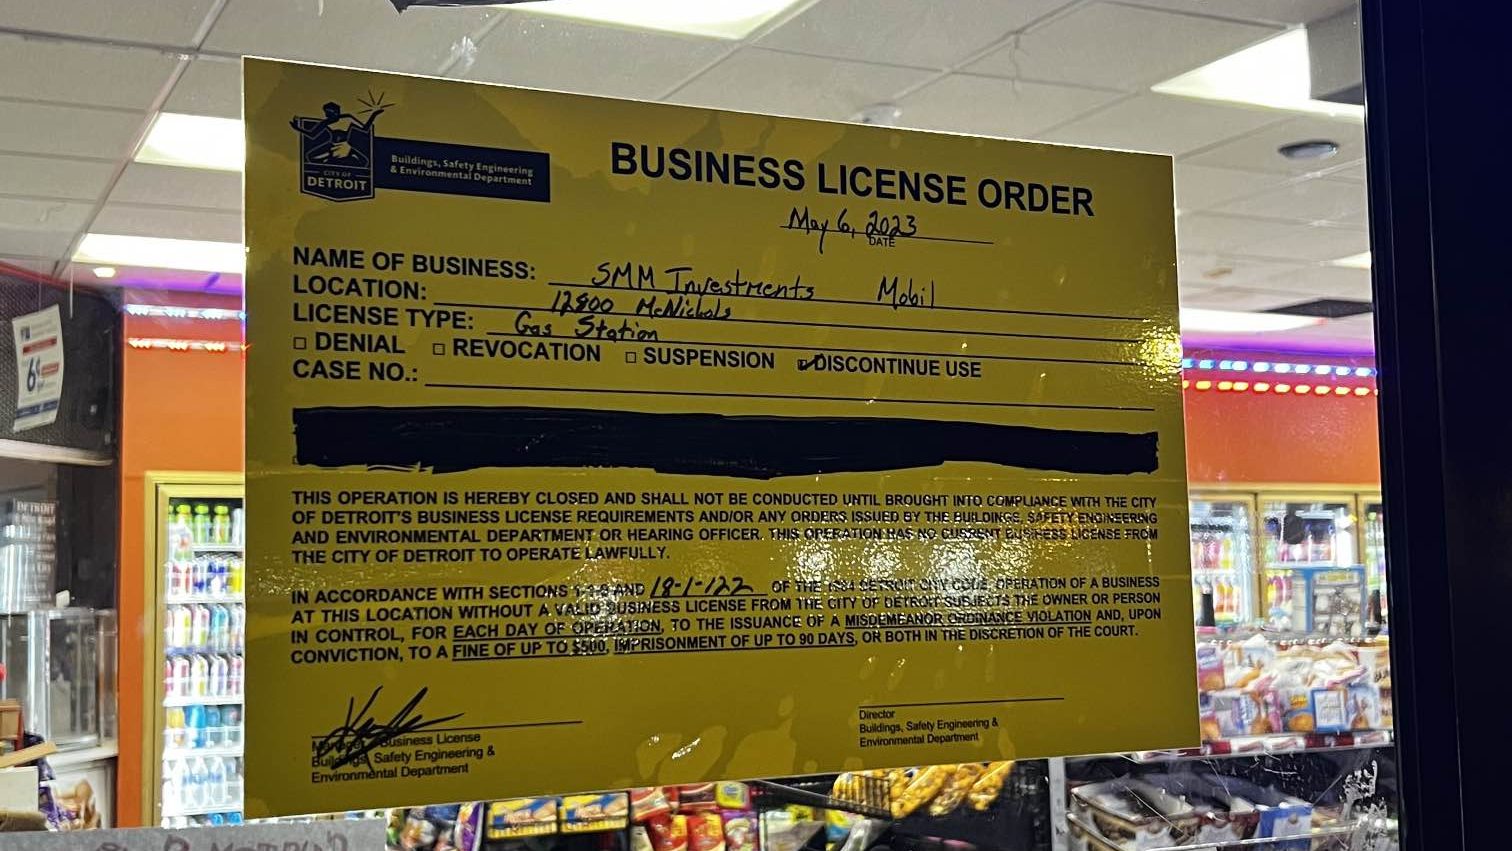 A sign displayed showing a violation by a gas station operating without a valid business license.